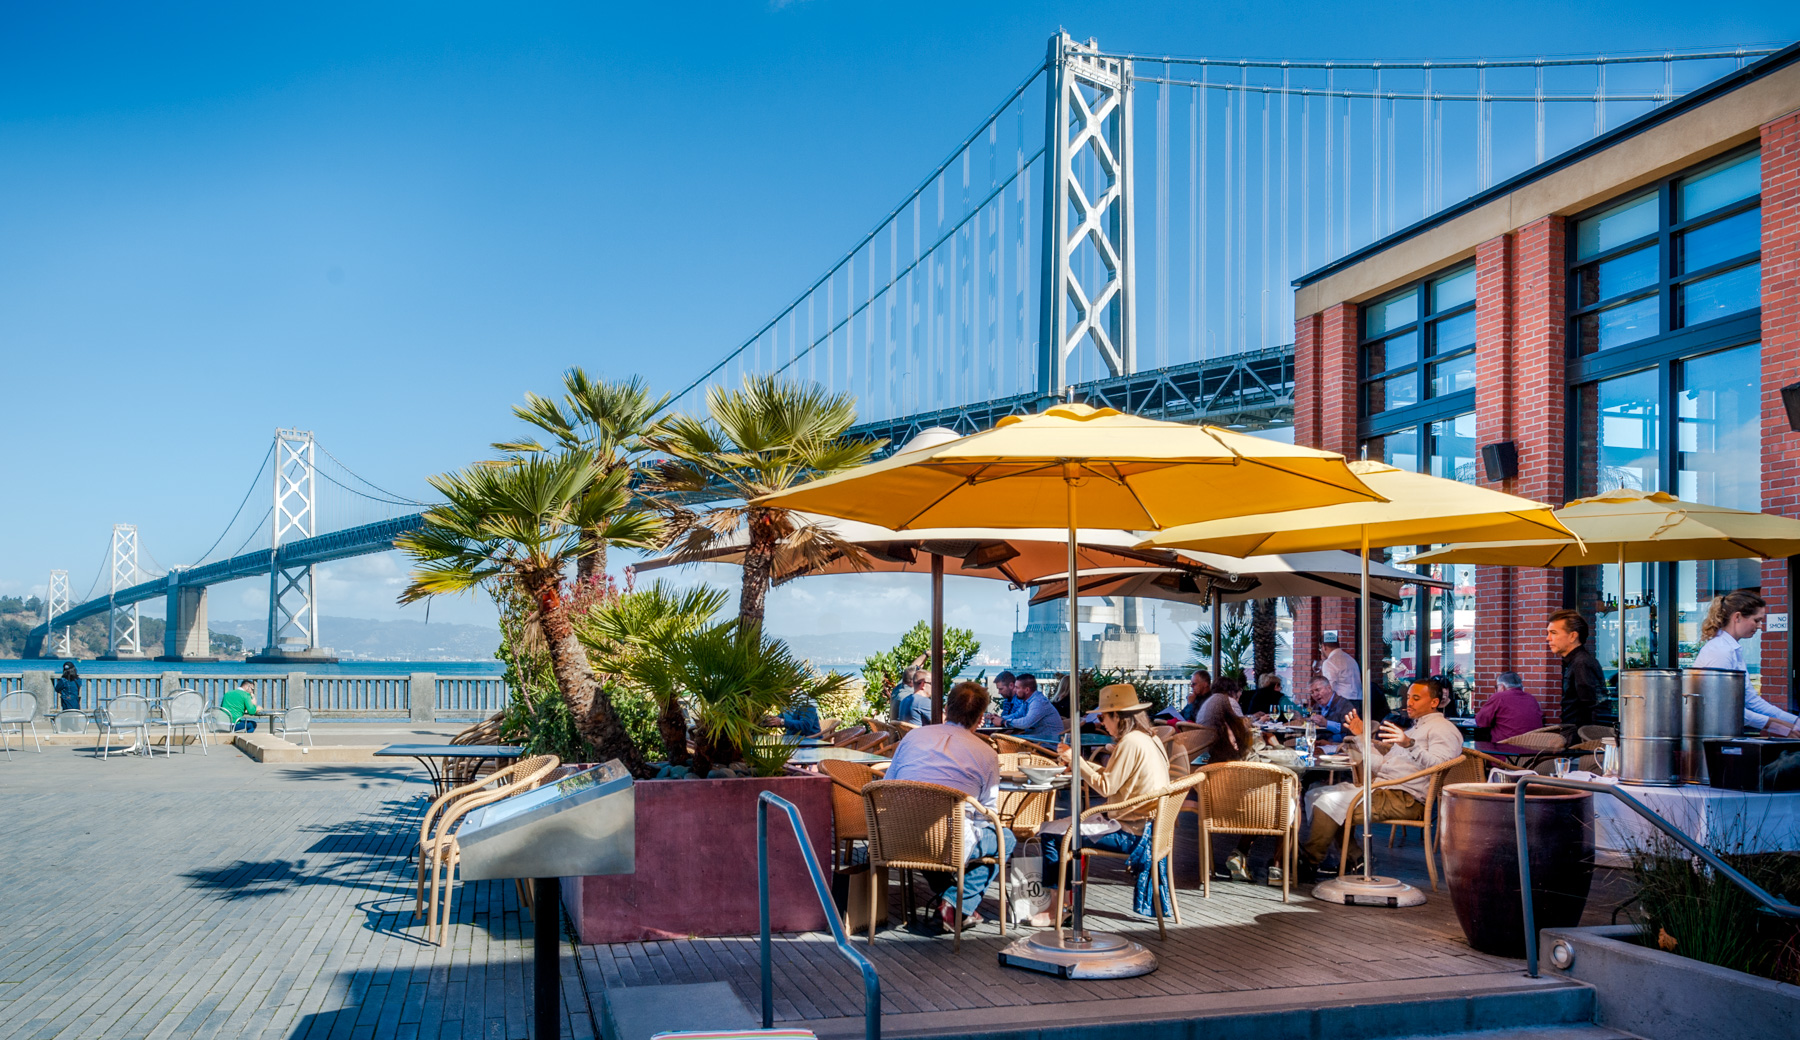 Photo of outdoor patior dining with stunning view of Bay Bridge.